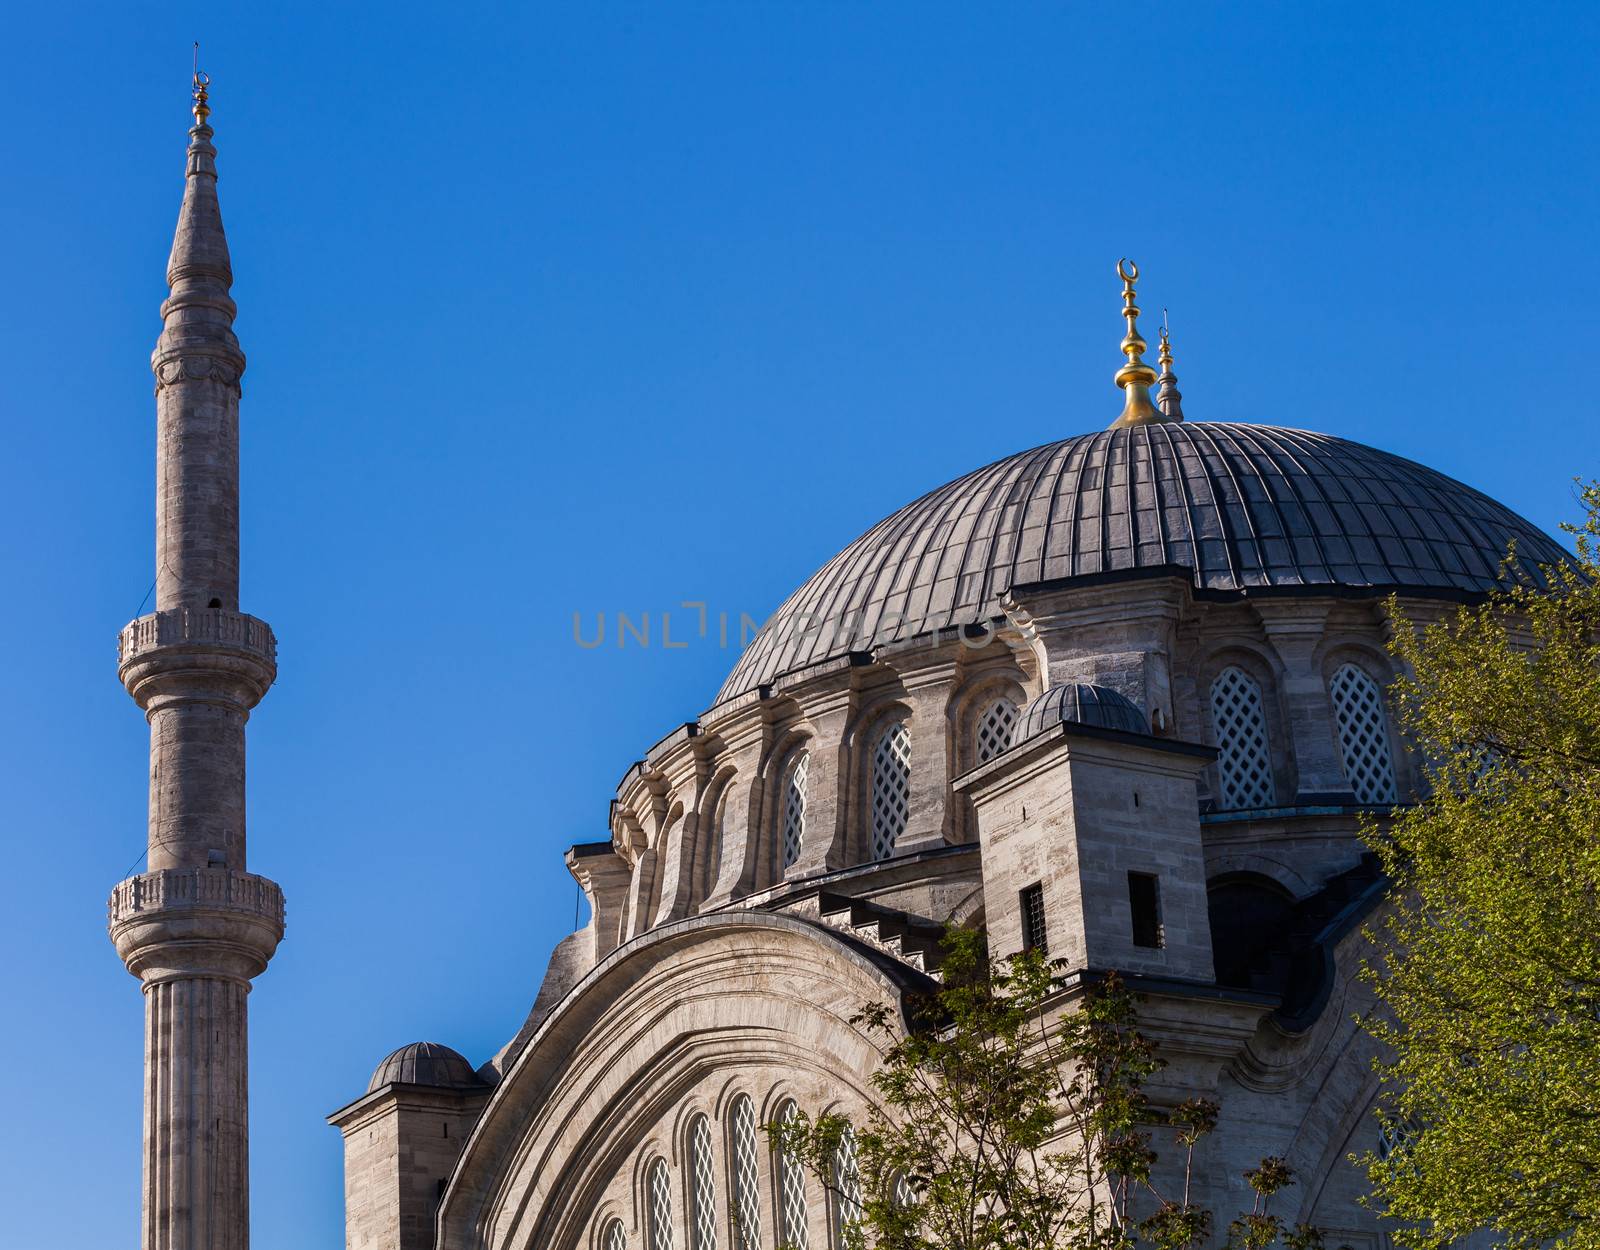 Dome and minaret of the Blue Mosque in Istanbul